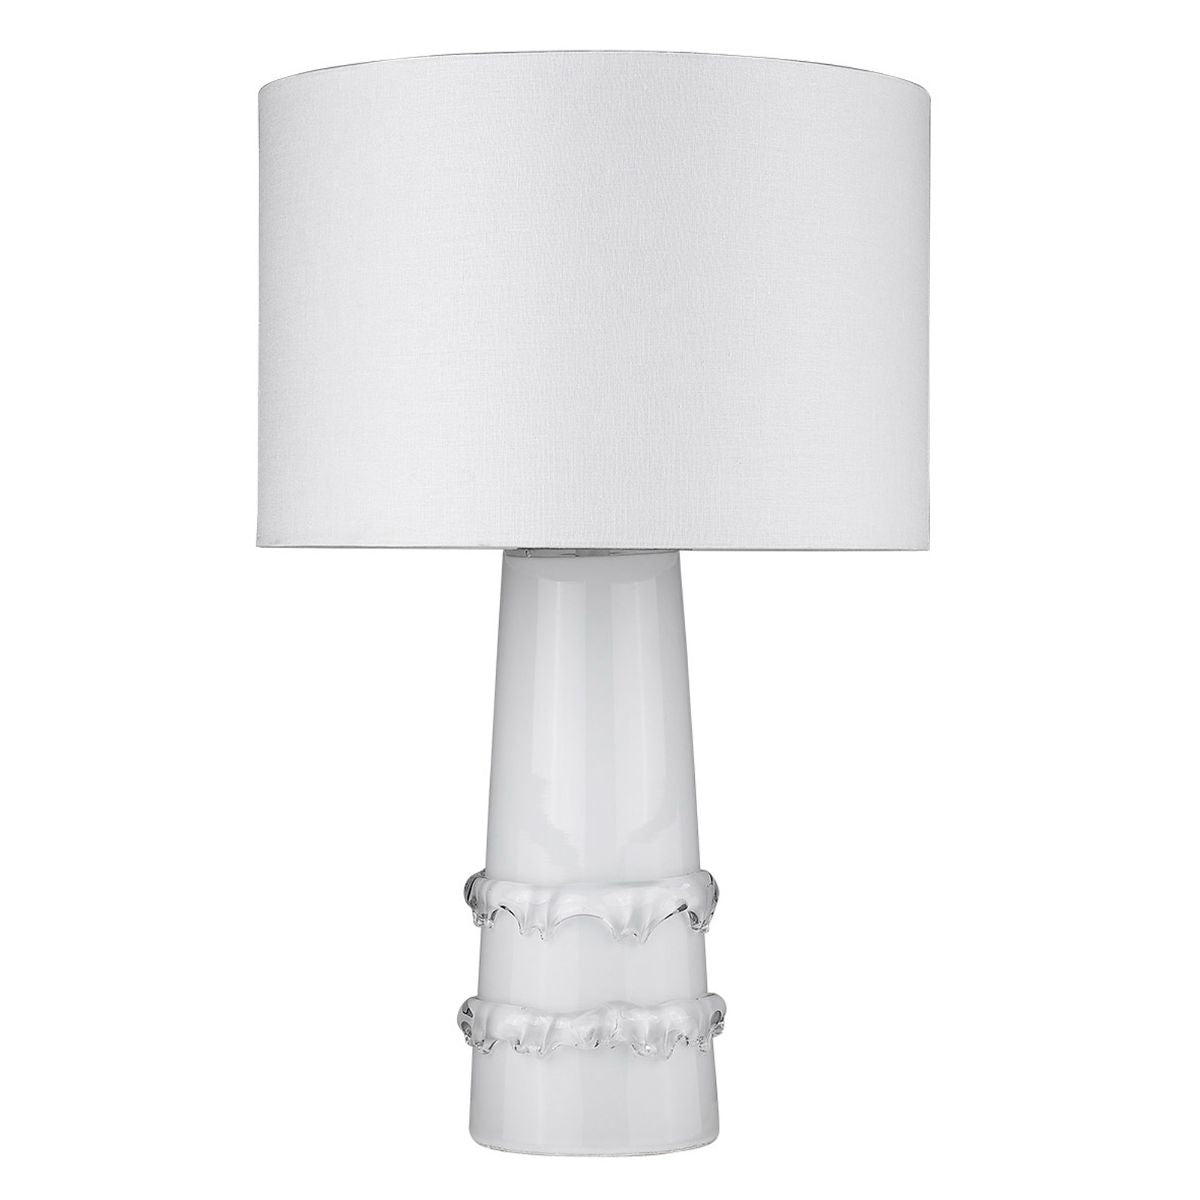 Trend Home 1 Light Table Lamp Cream Glass Body and Polished Nickel Accents